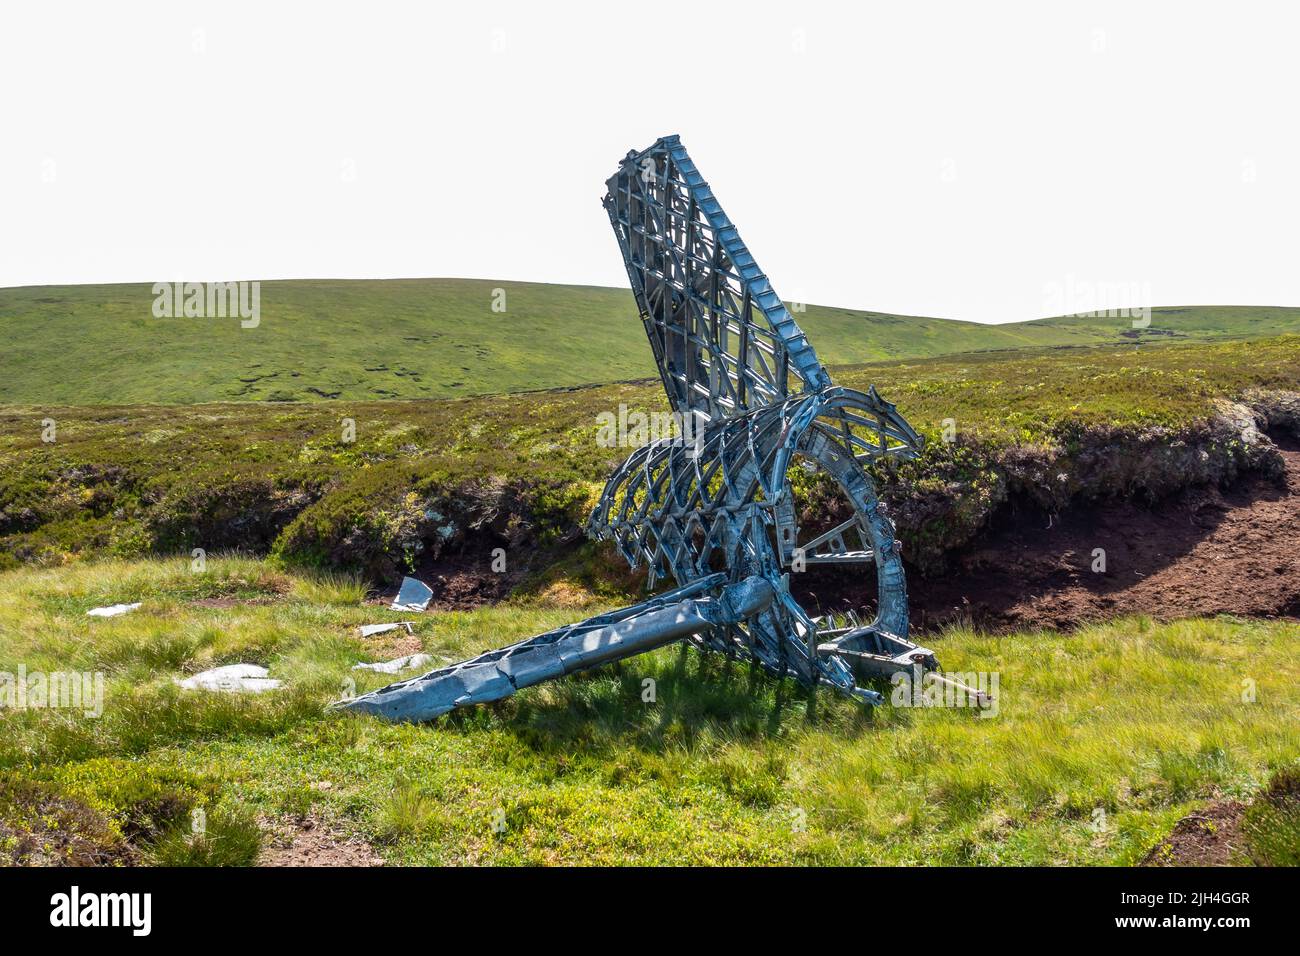 Part of the tail of a Vickers Wellington bomber wreckage that crashed in 1942 on the hill near Ben Tirran in Glen Clova, Angus, Scotland Stock Photo